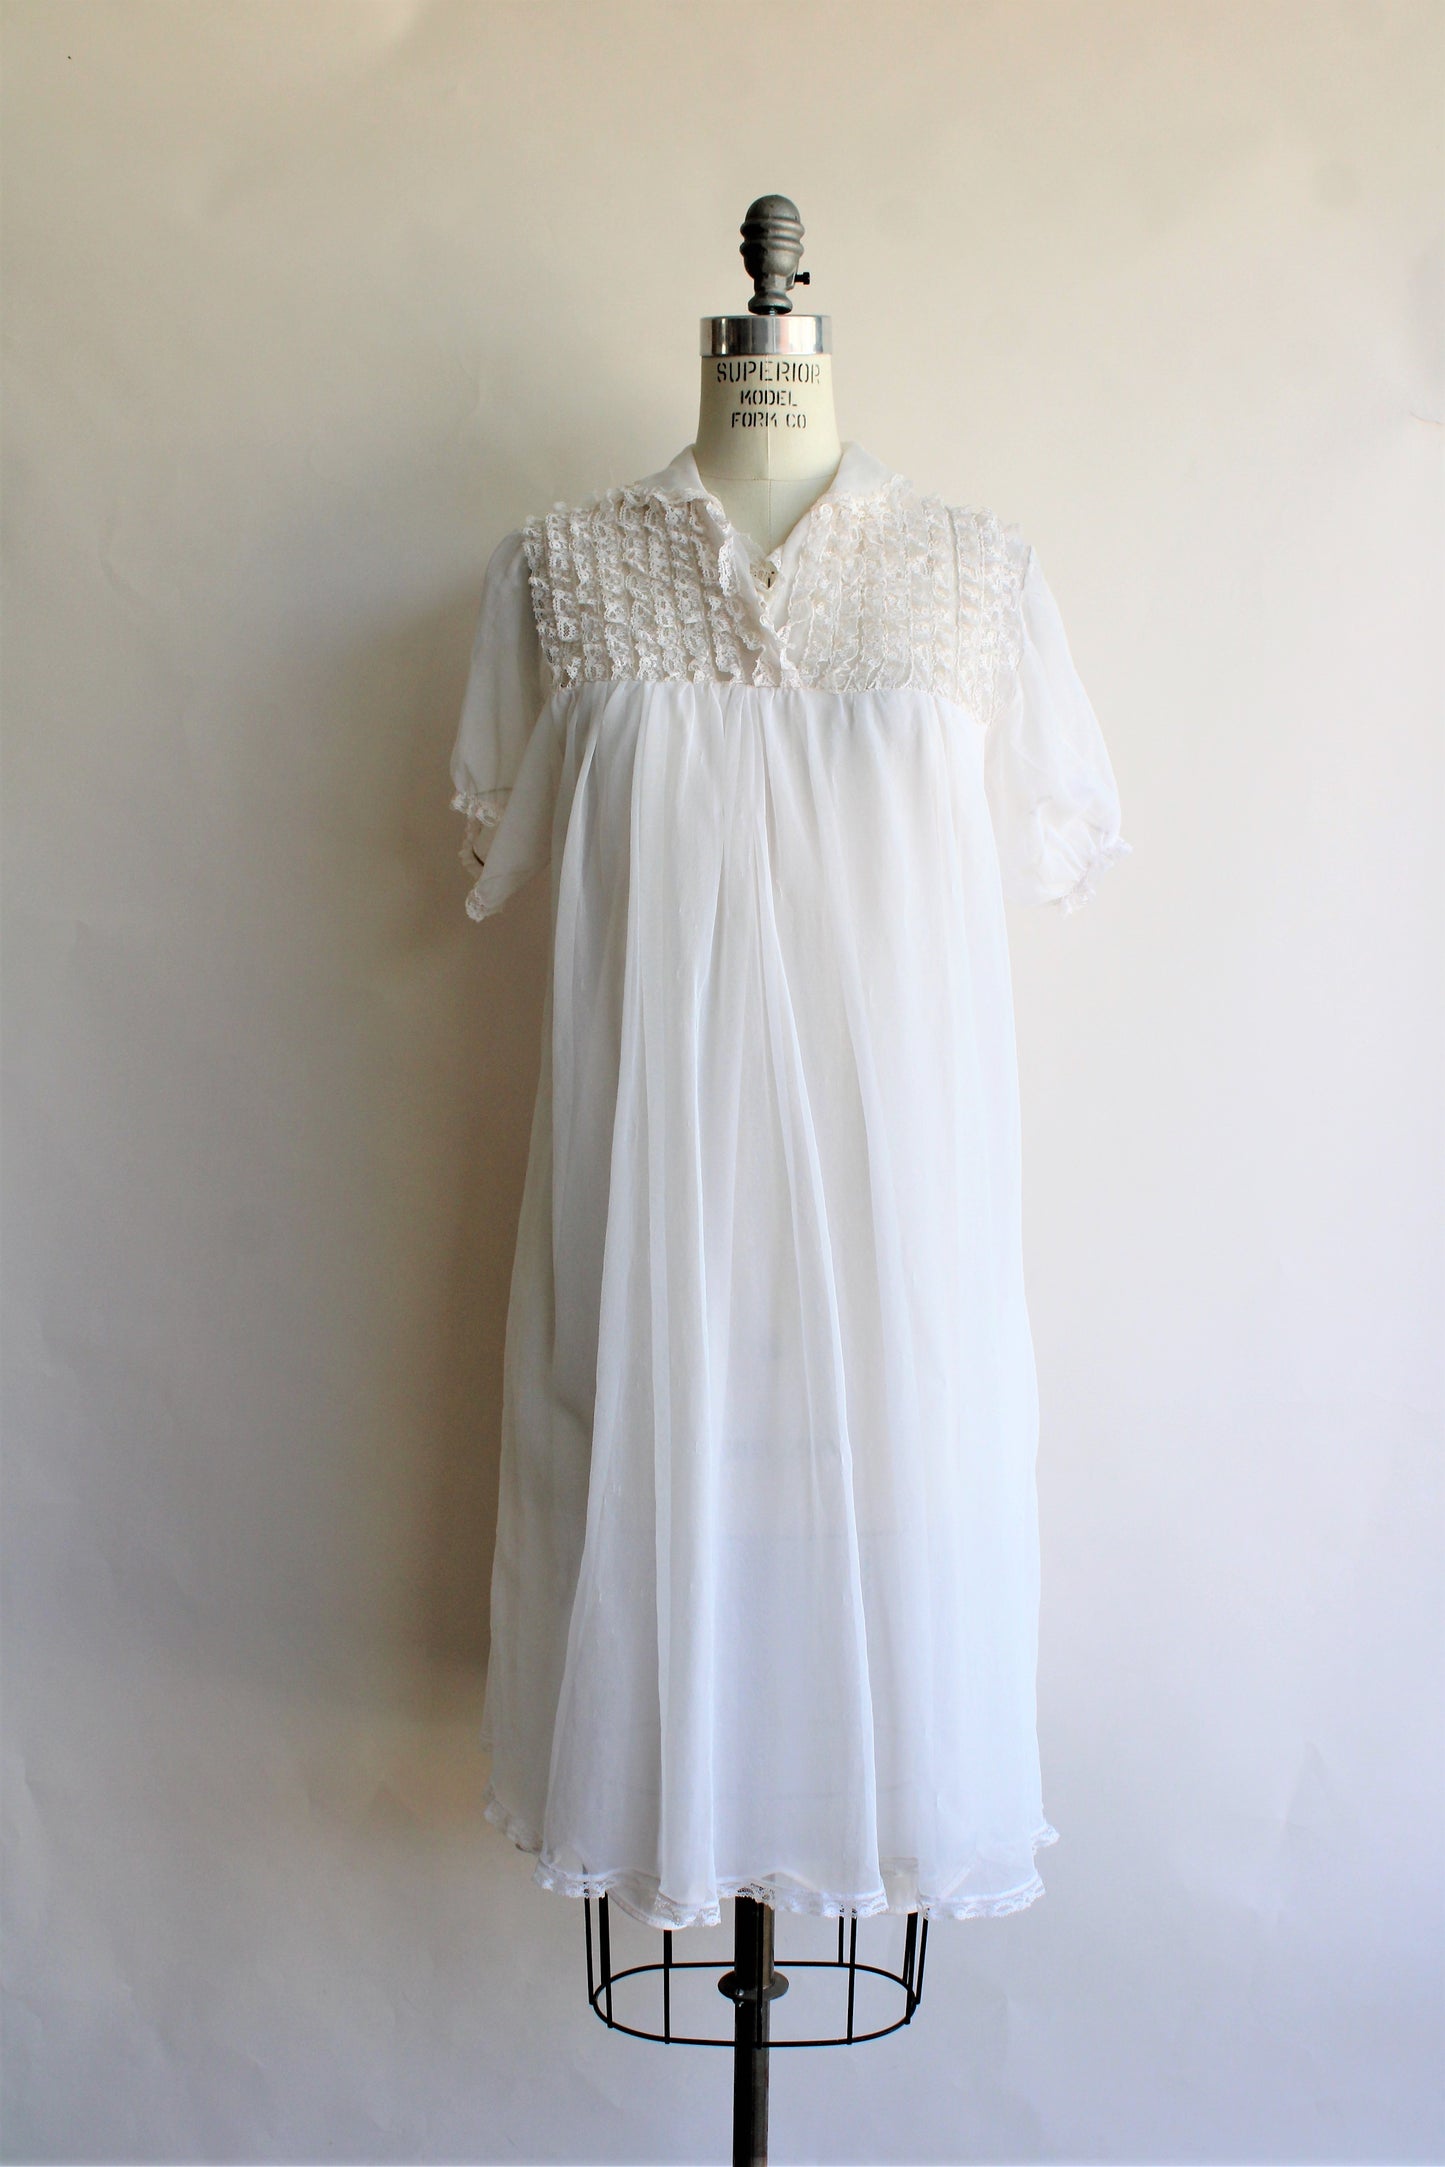 Vintage 1960s White Babydoll Nightie with Lace Trim